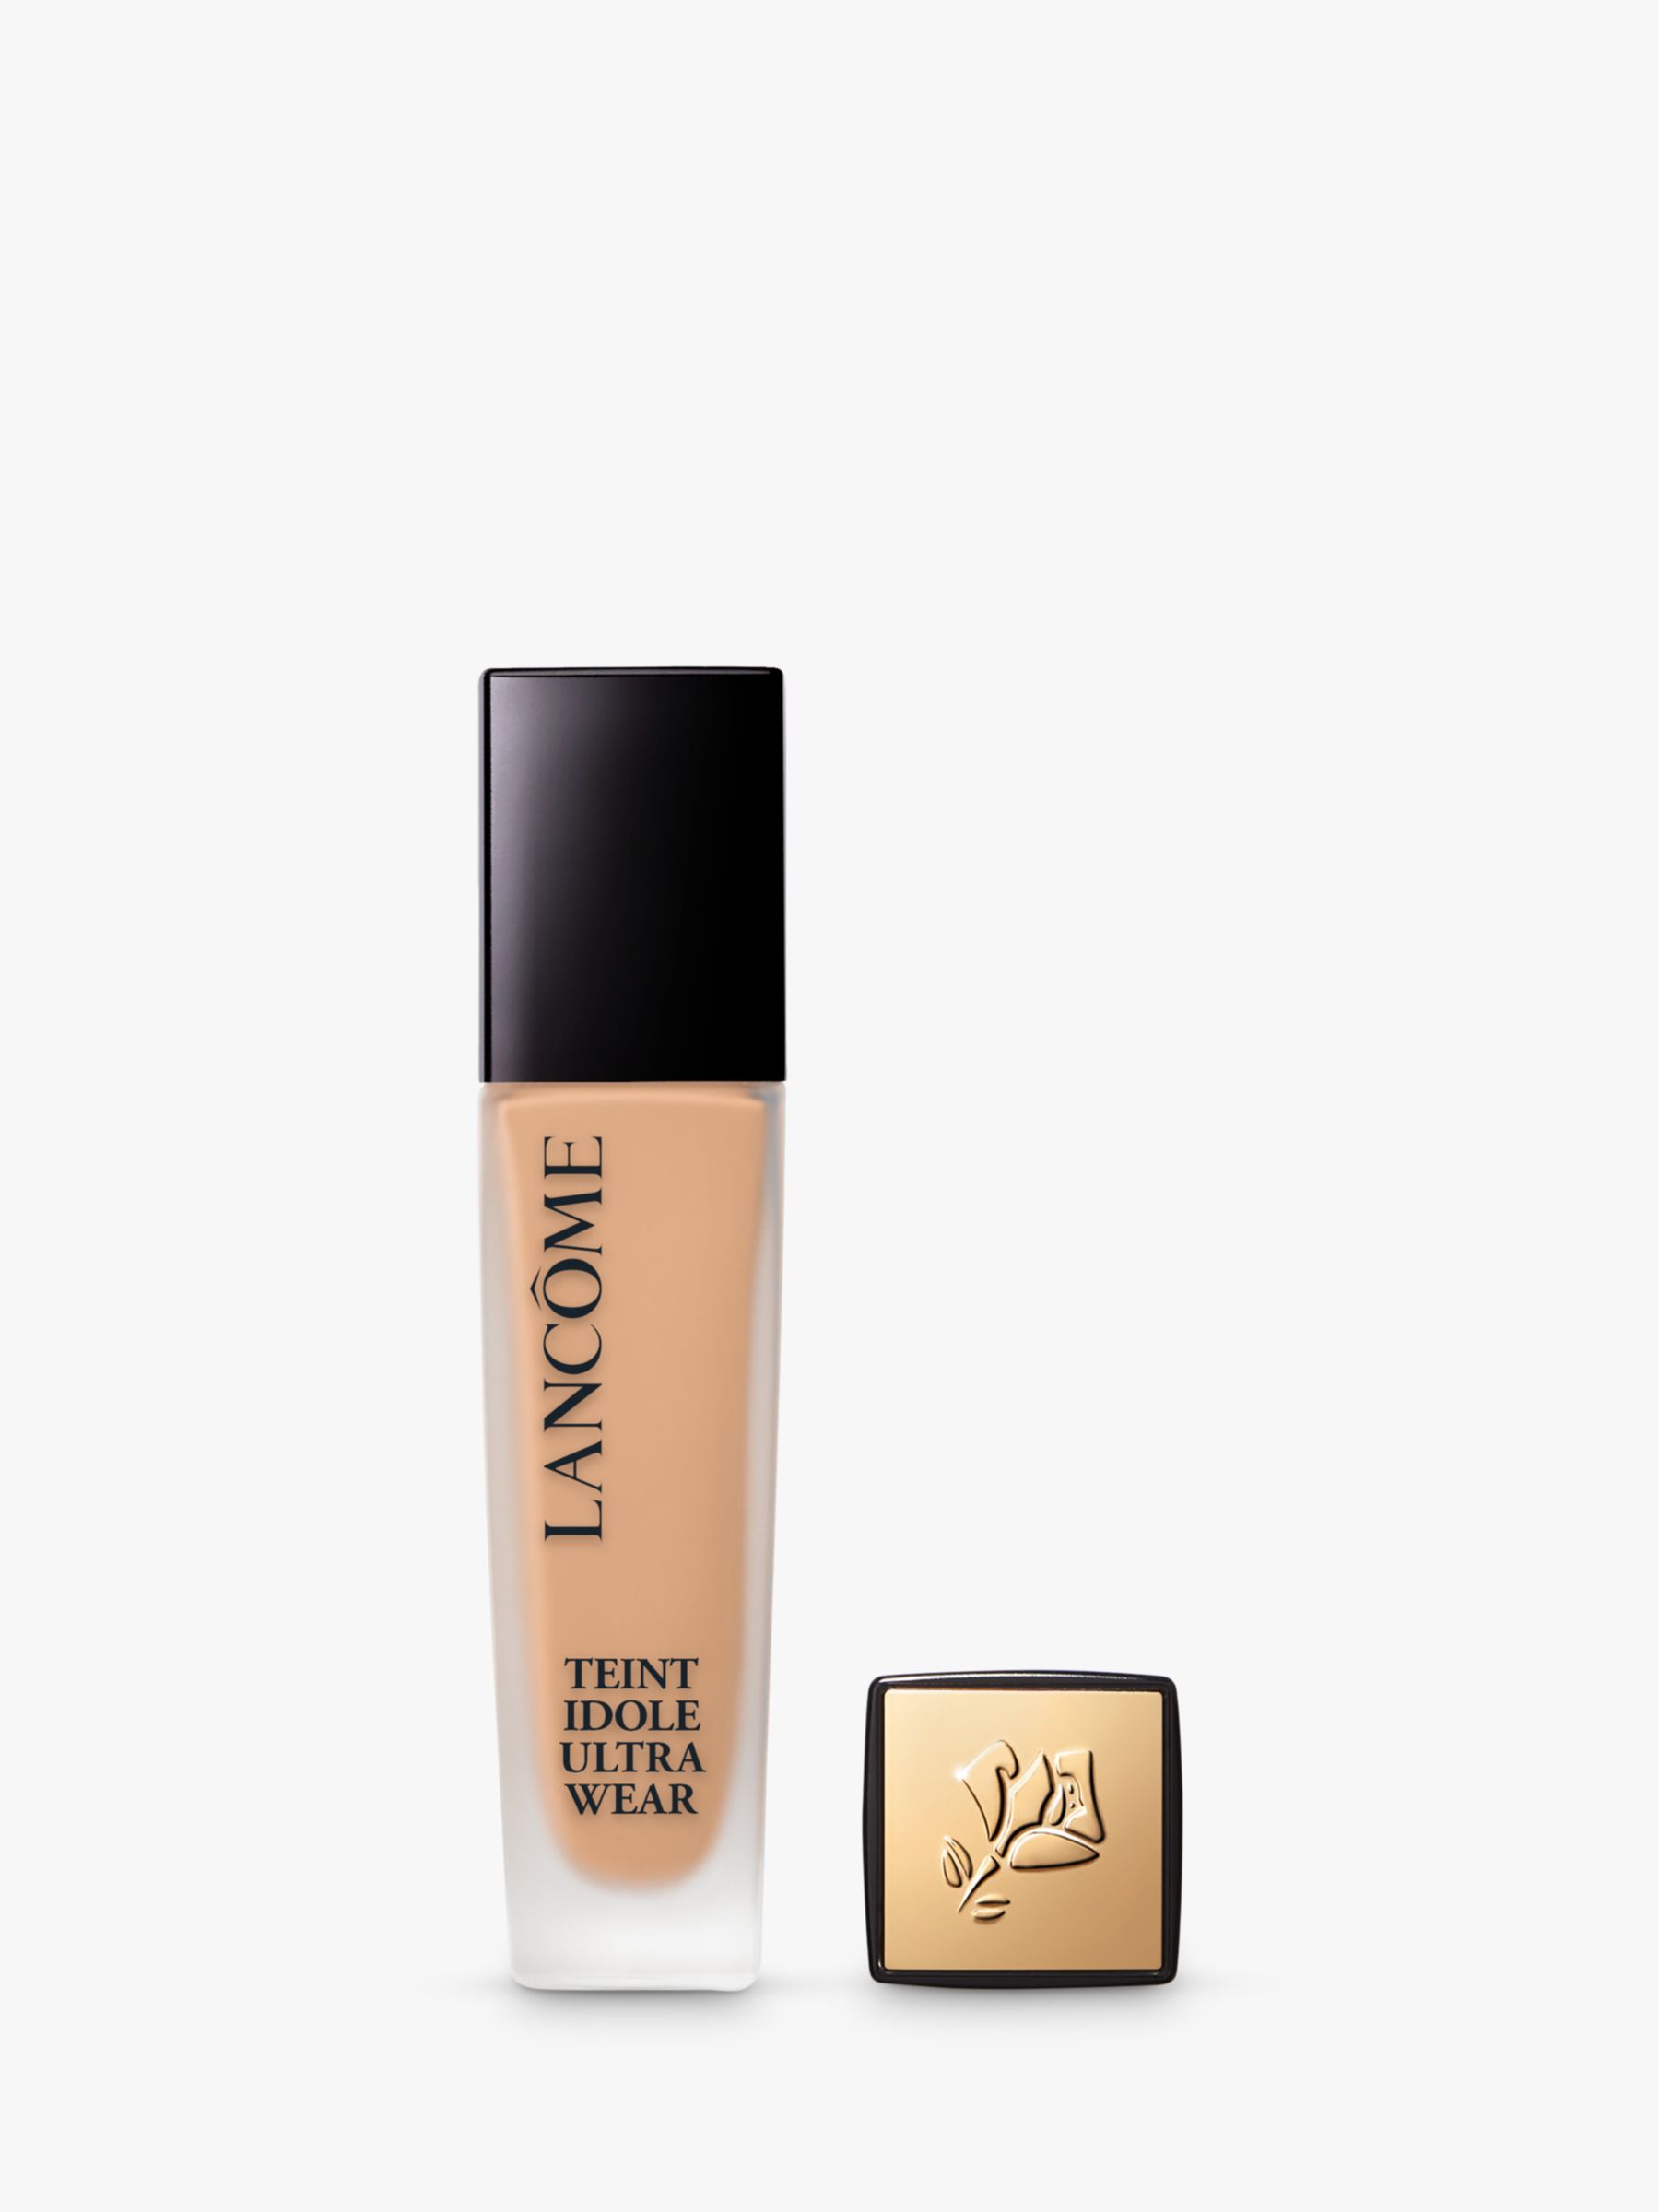 CHANEL Ultra Le Teint Ultrawear - All-Day Comfort Flawless Finish  Foundation, Beige 20 at John Lewis & Partners